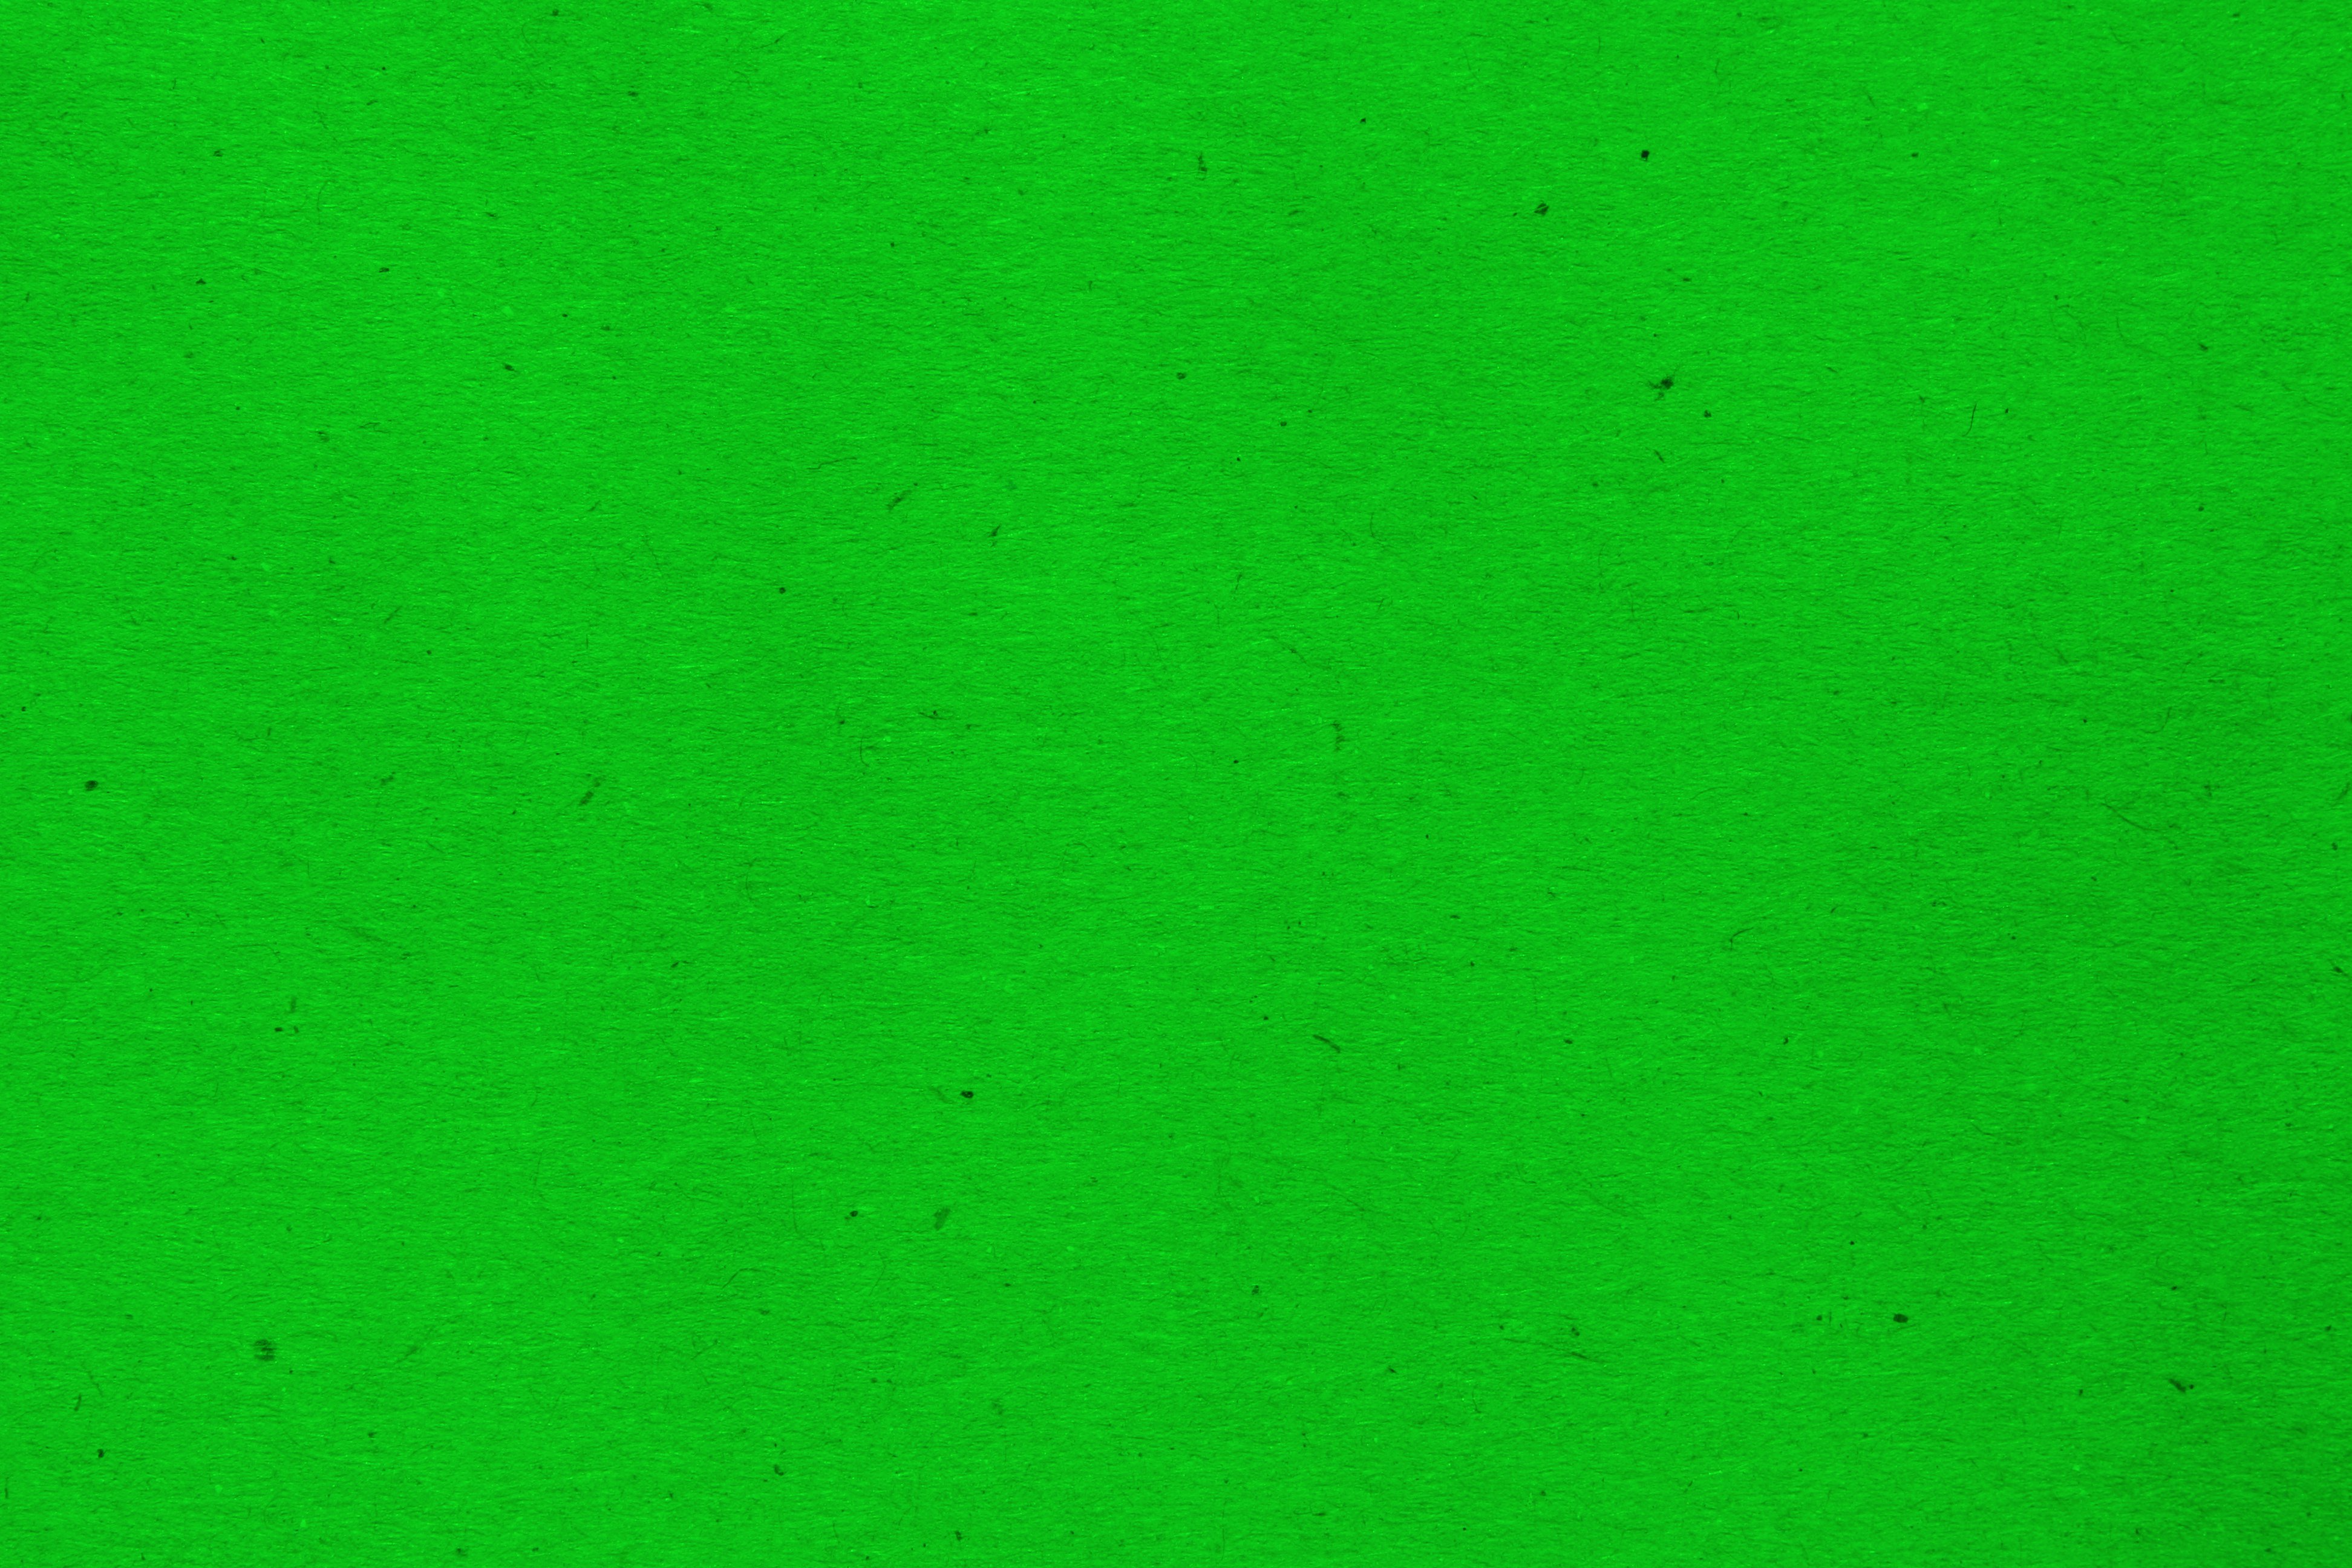 Neon Green Paper Texture with Flecks Picture, Free Photograph